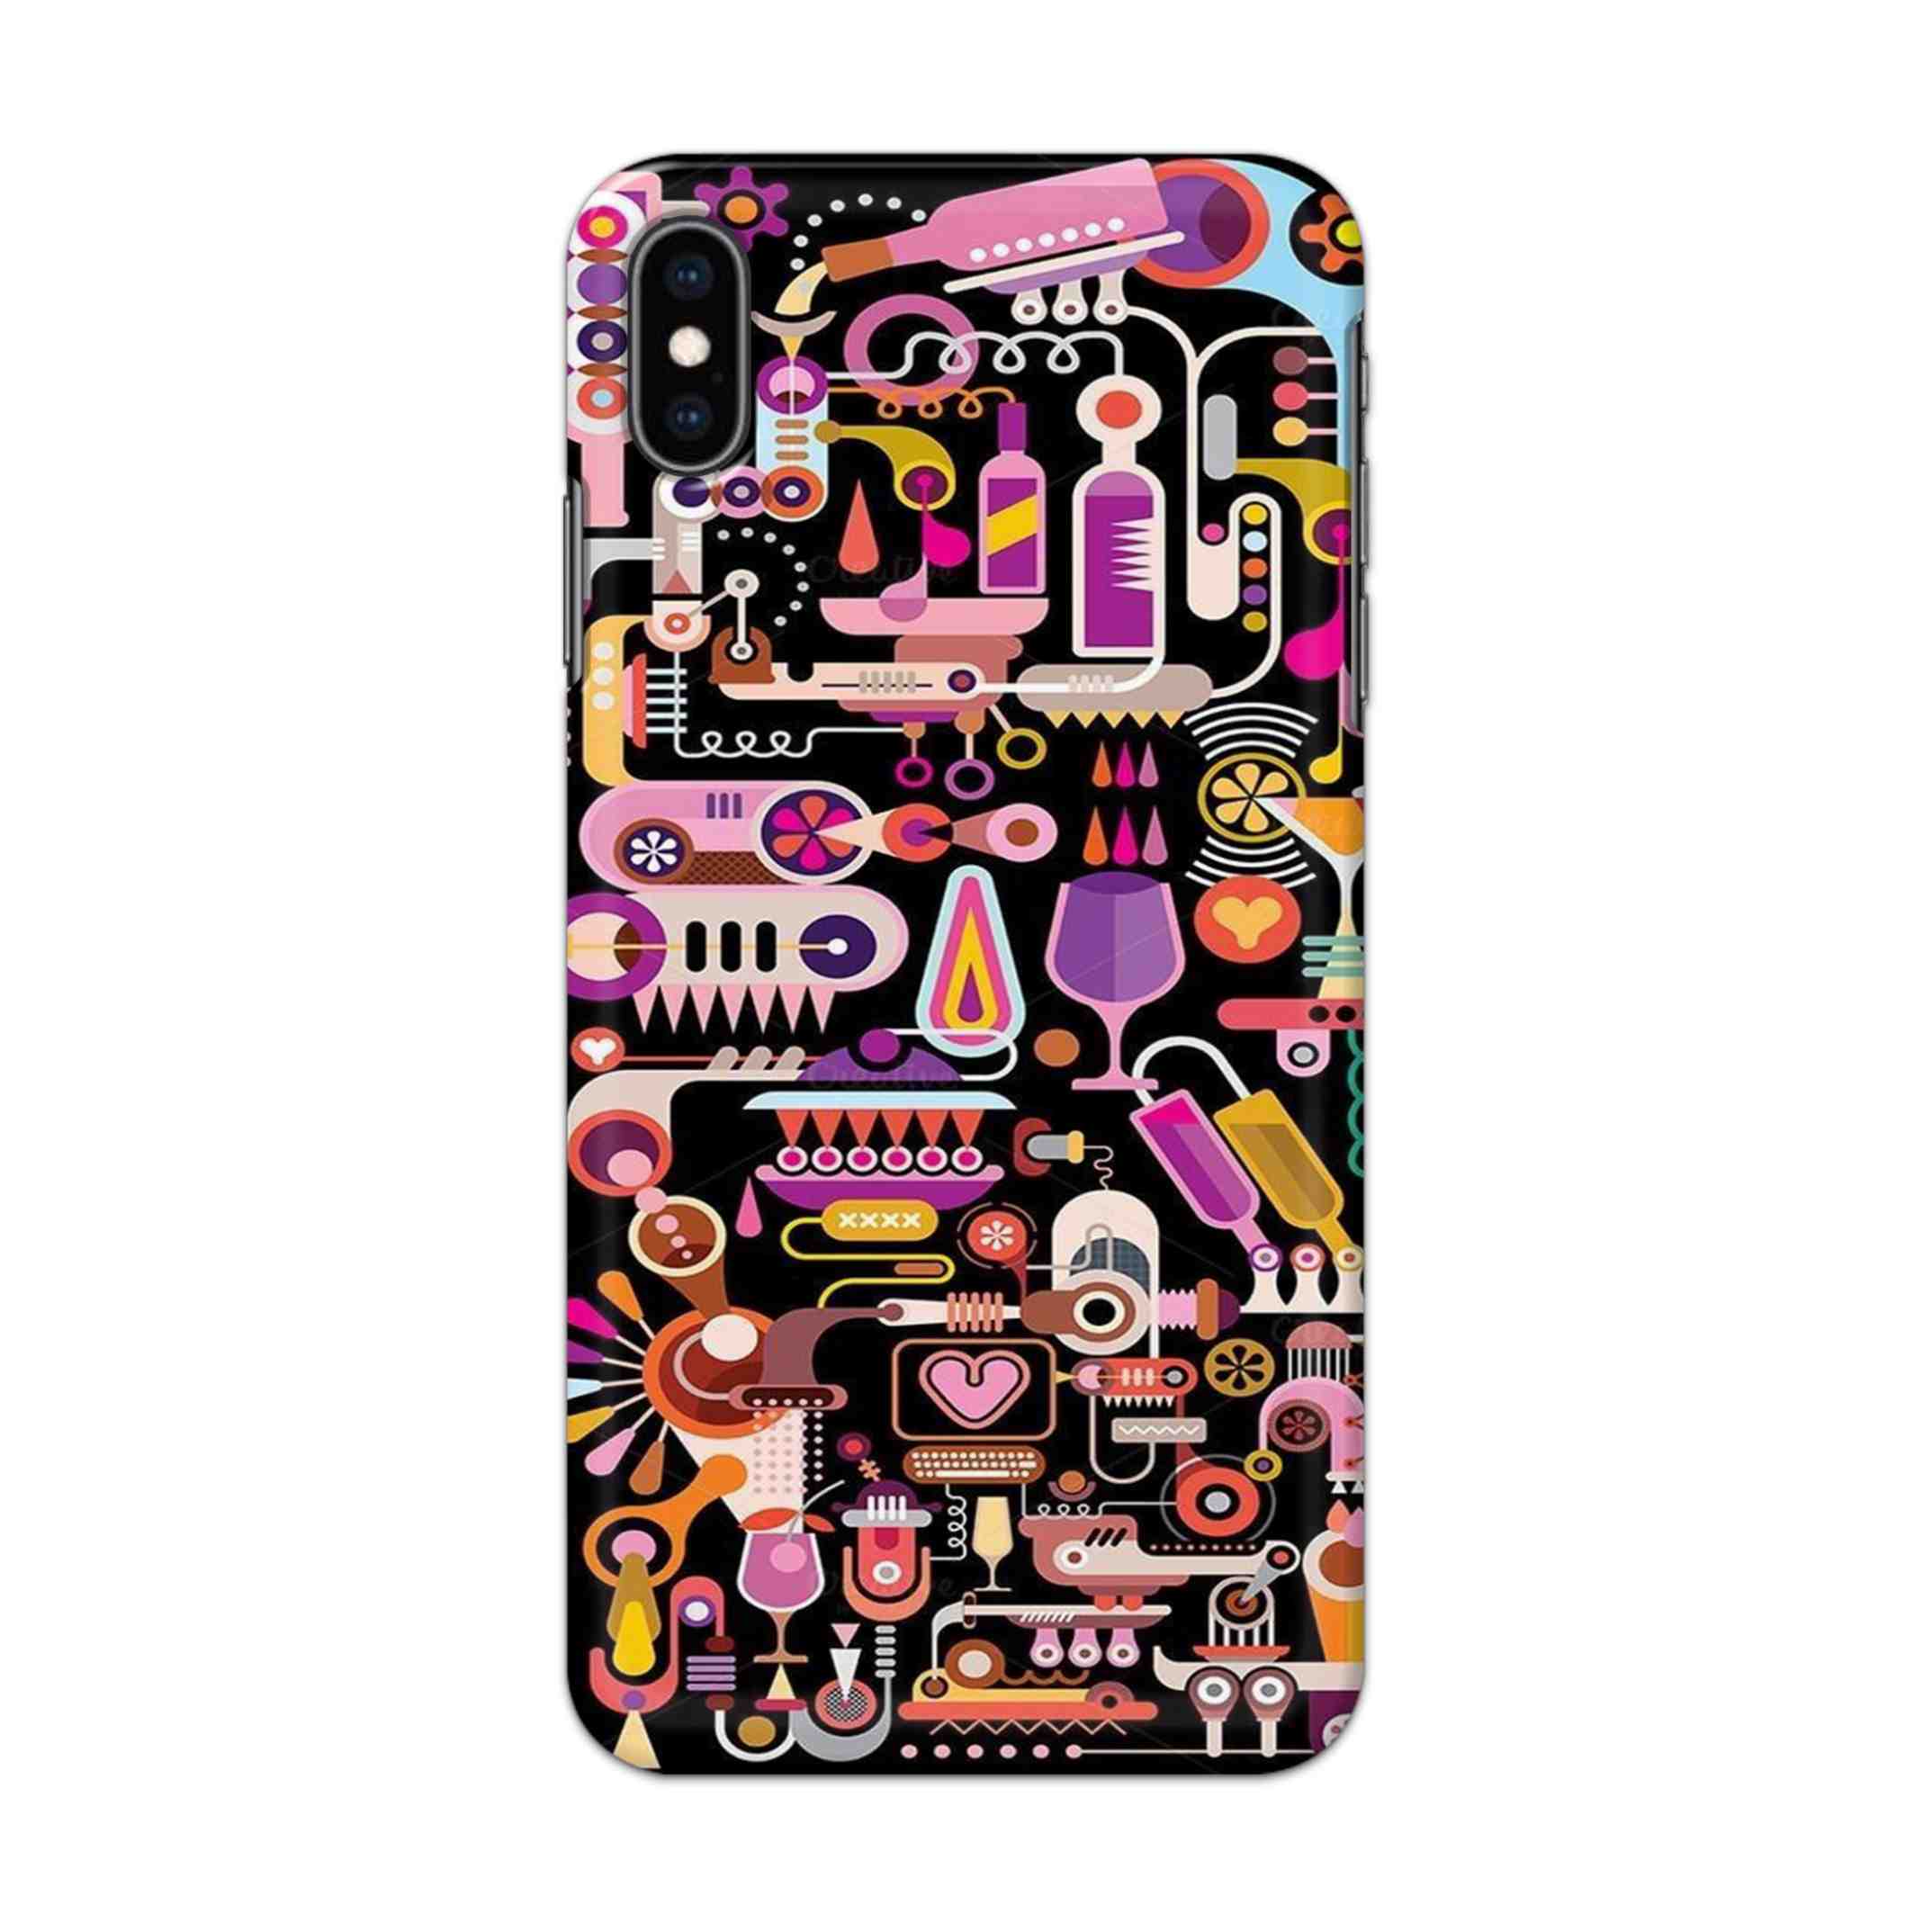 Buy Art Hard Back Mobile Phone Case/Cover For iPhone XS MAX Online